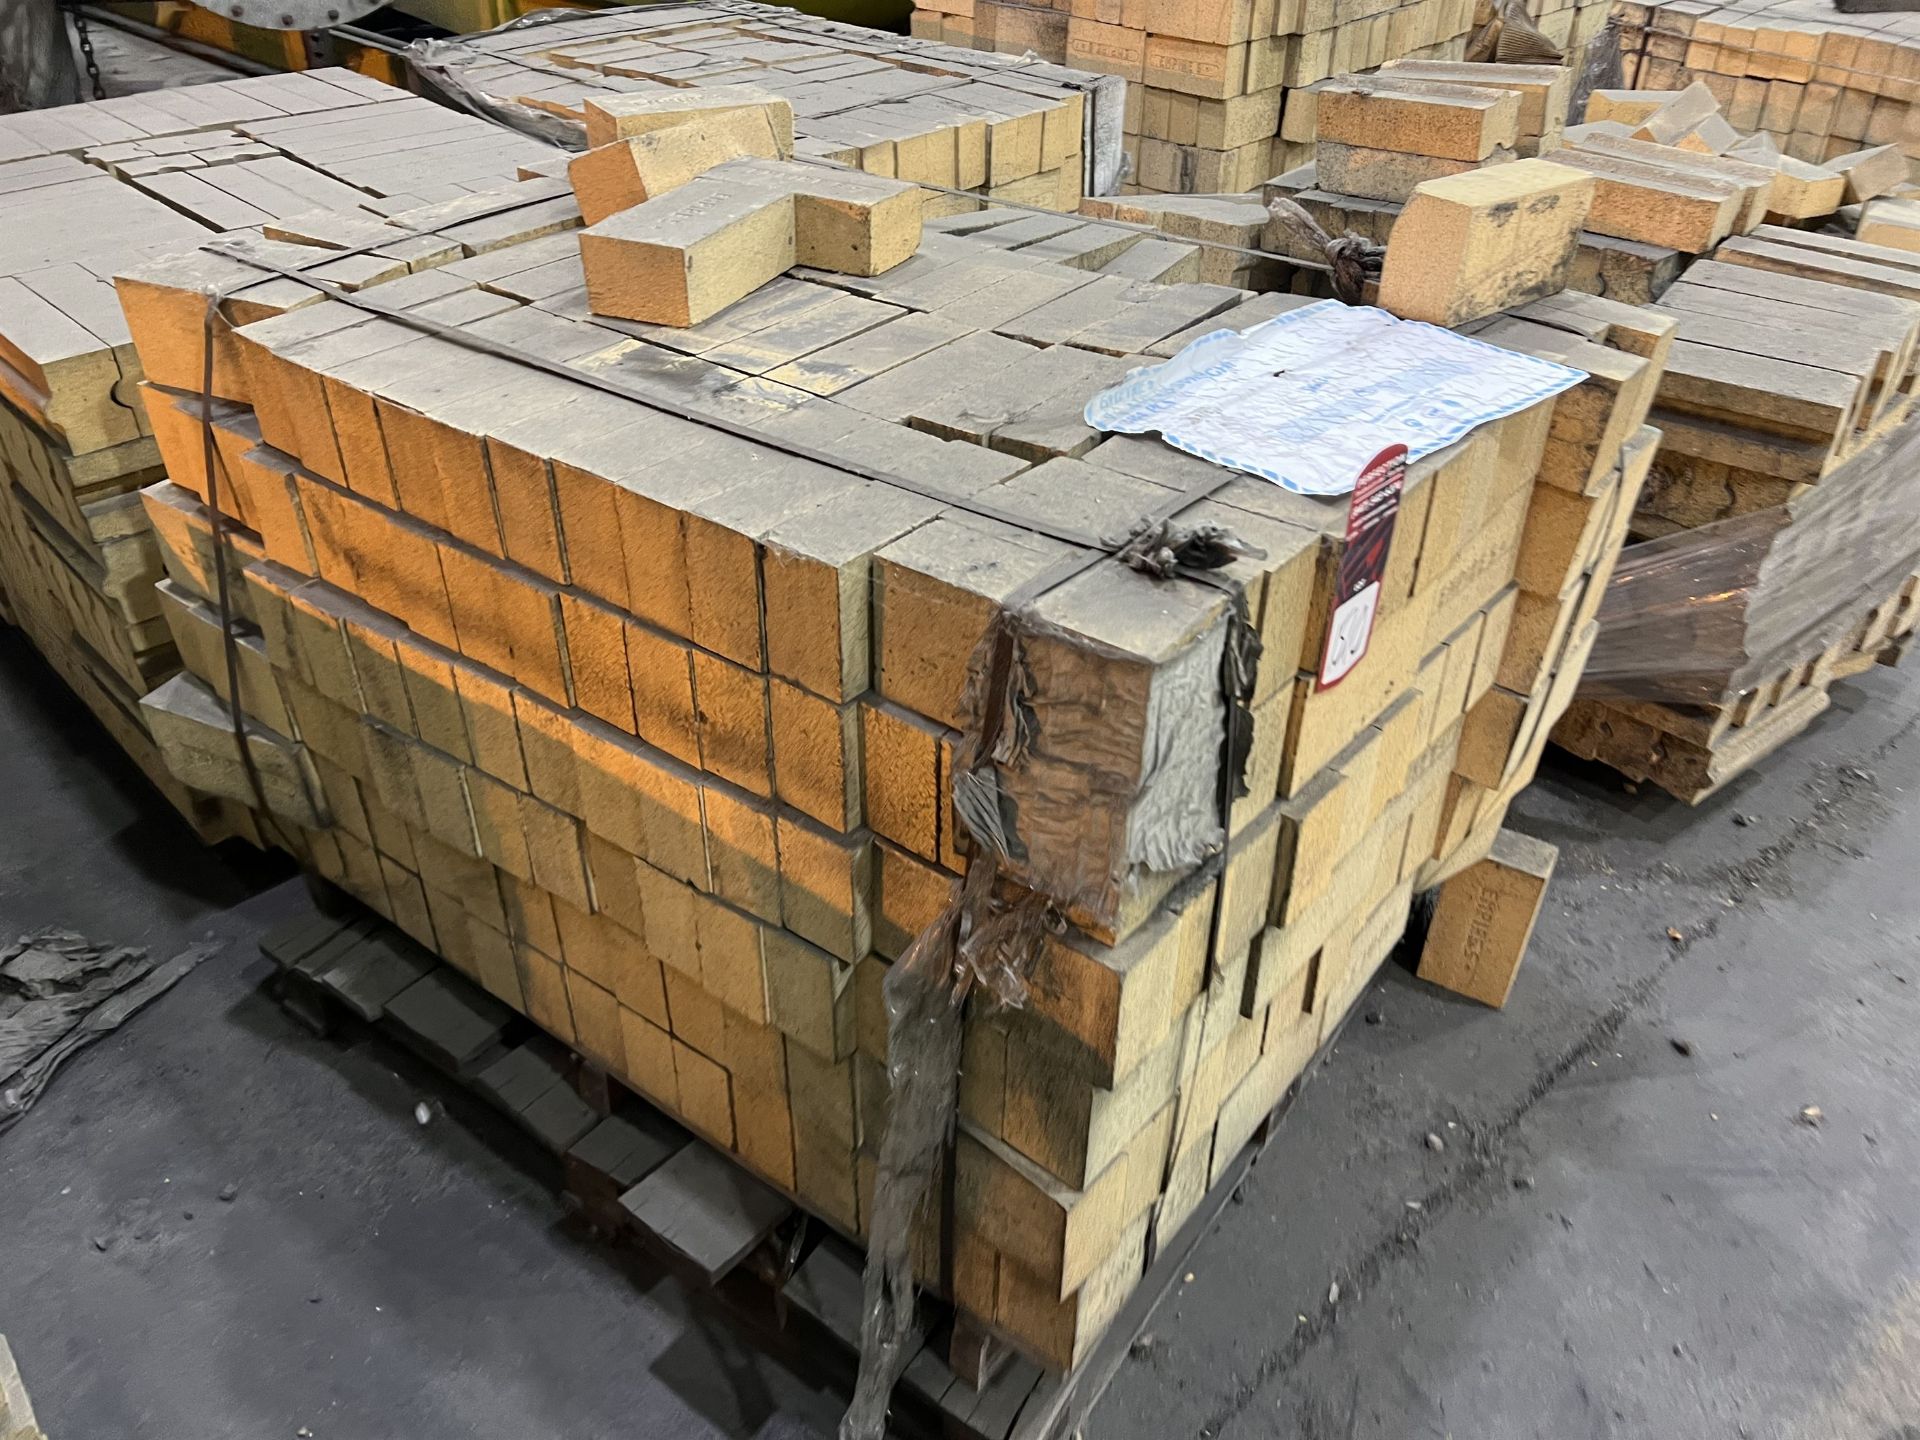 Lot of (9) Pallets of EMPIRE S Carbon Baking Straight Brick, 9" x 4.5" x 3" Bricks - Image 3 of 5